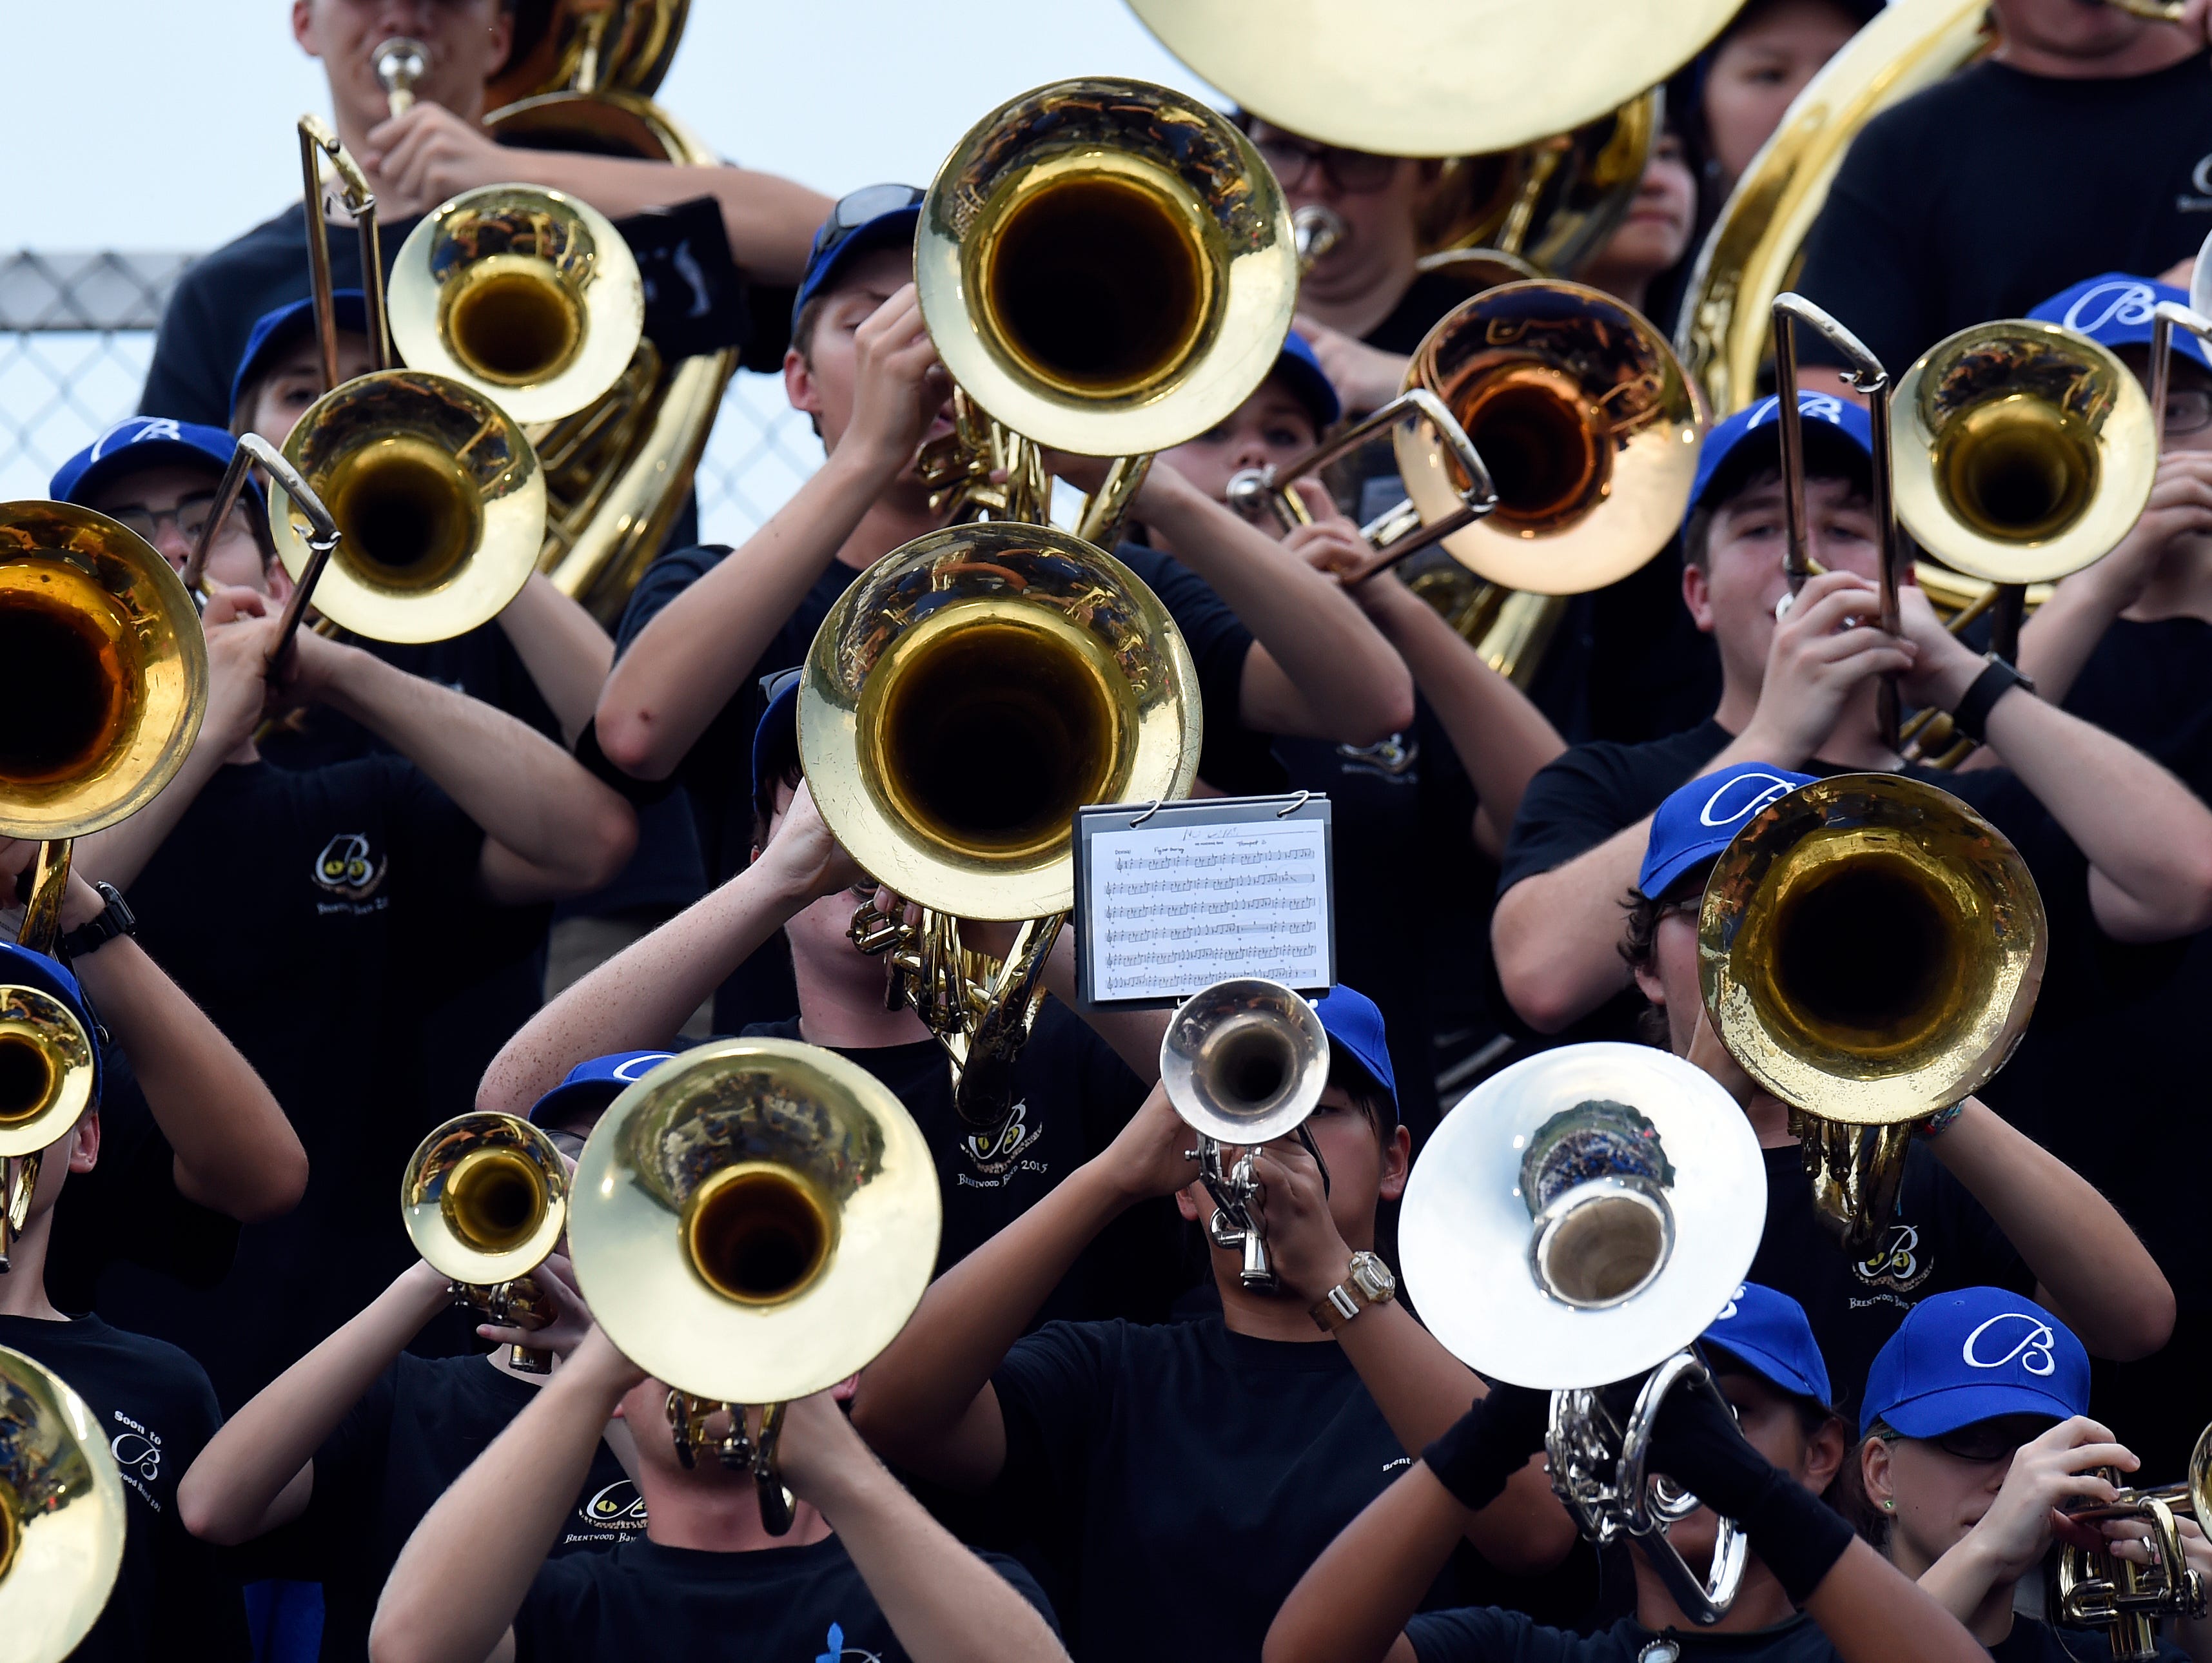 The Brentwood High School band performs before an high school football game against Ravenwoodon Friday, Aug. 26, 2016, in Brentwood, Tenn.